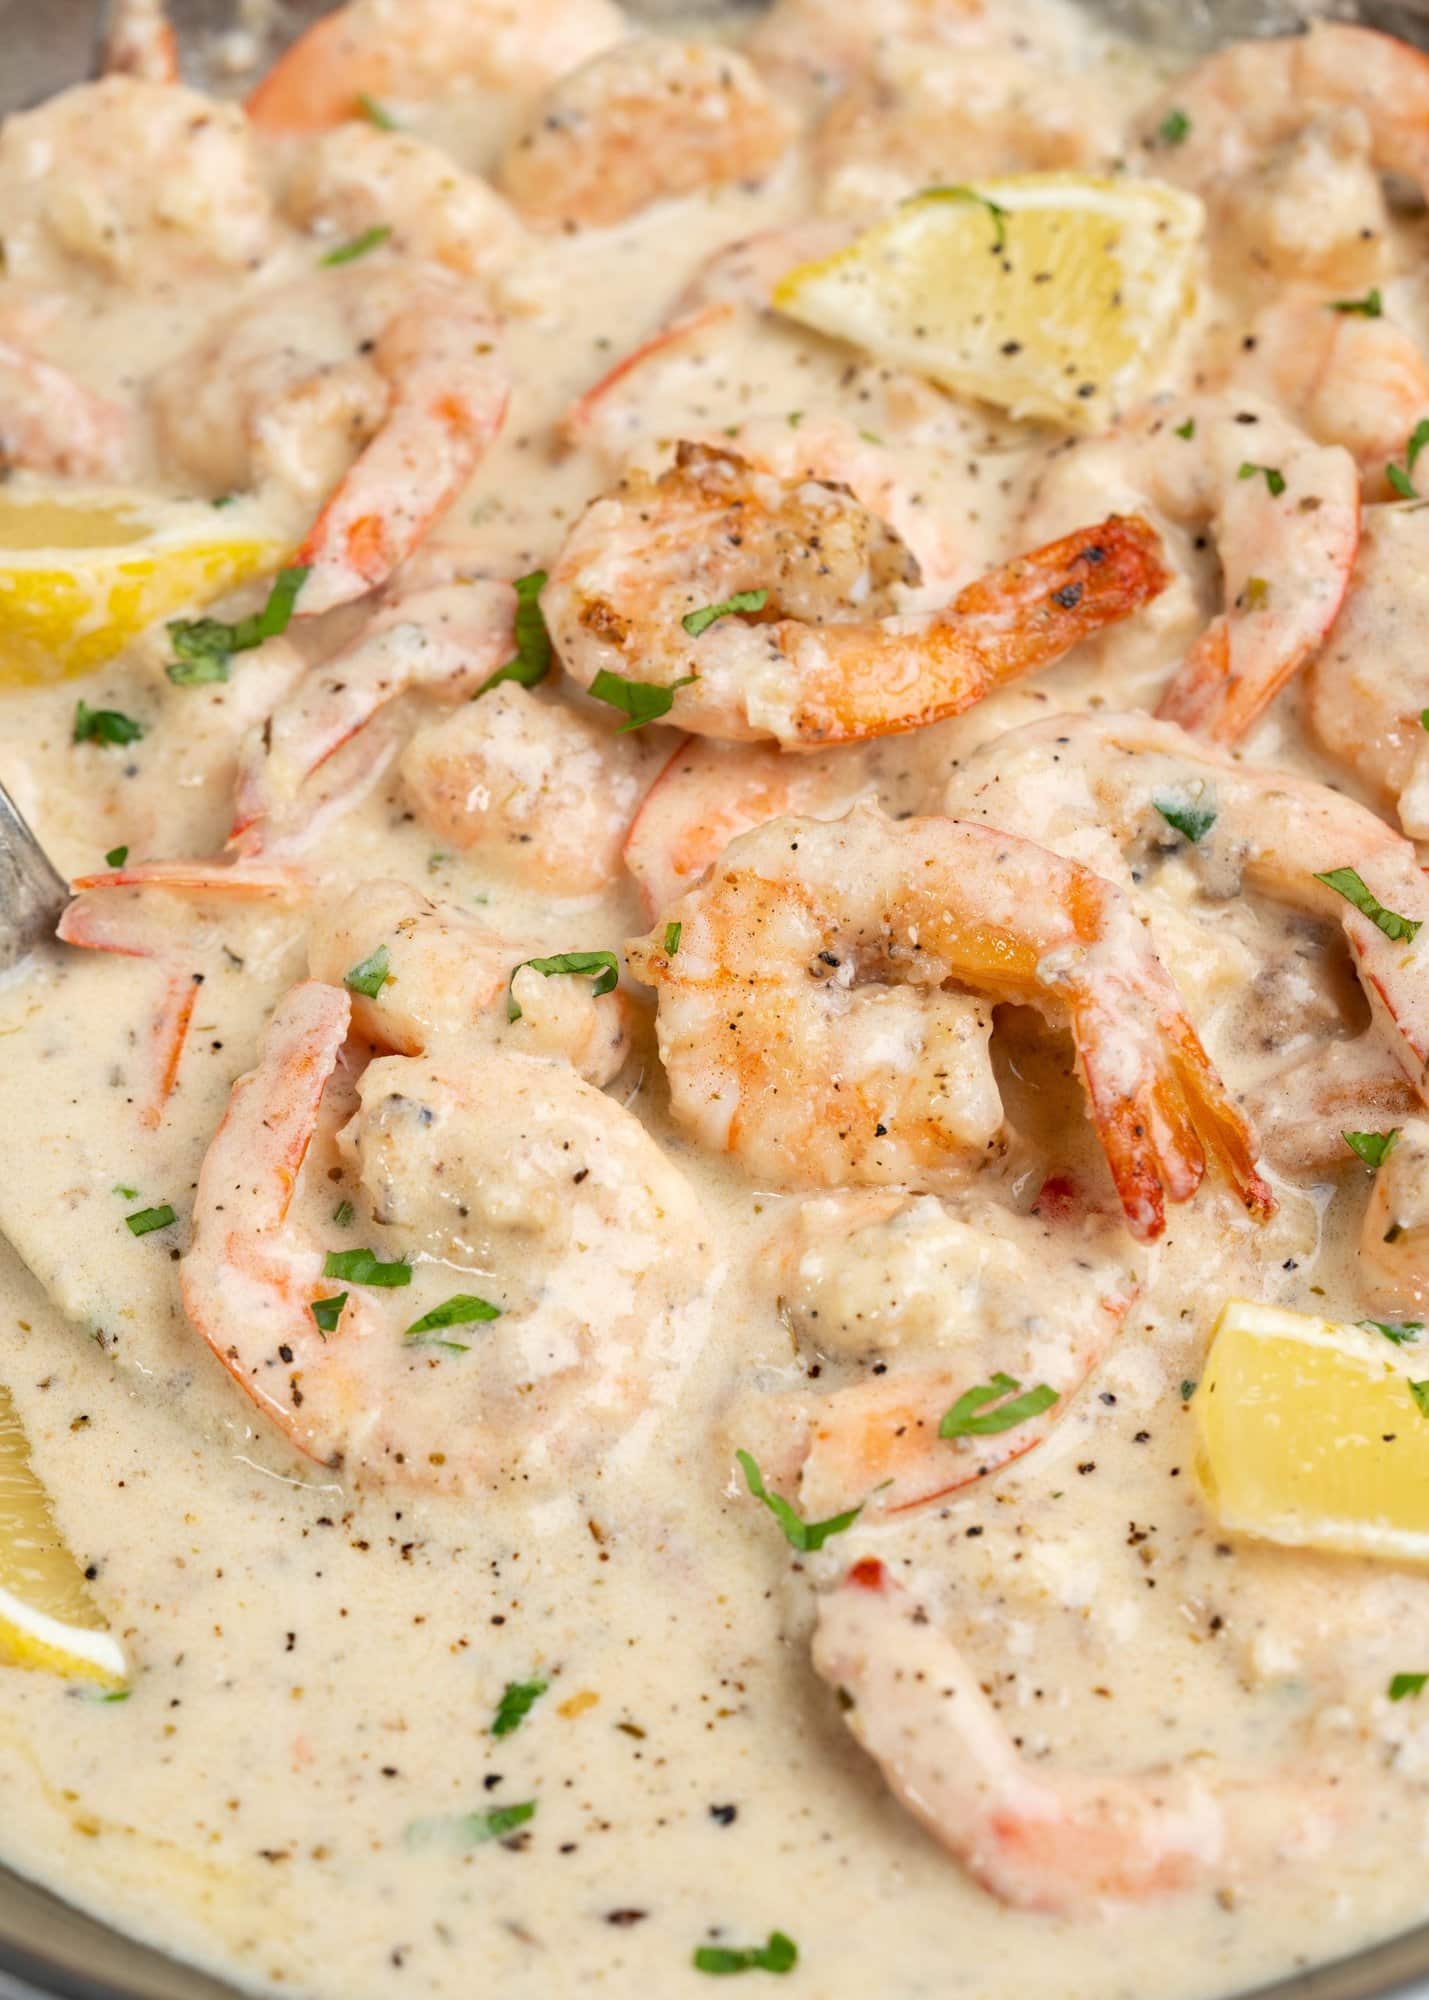 Shrimp coated with the creamy sauce and topped with some chopped fresh parsley and lemon slices.